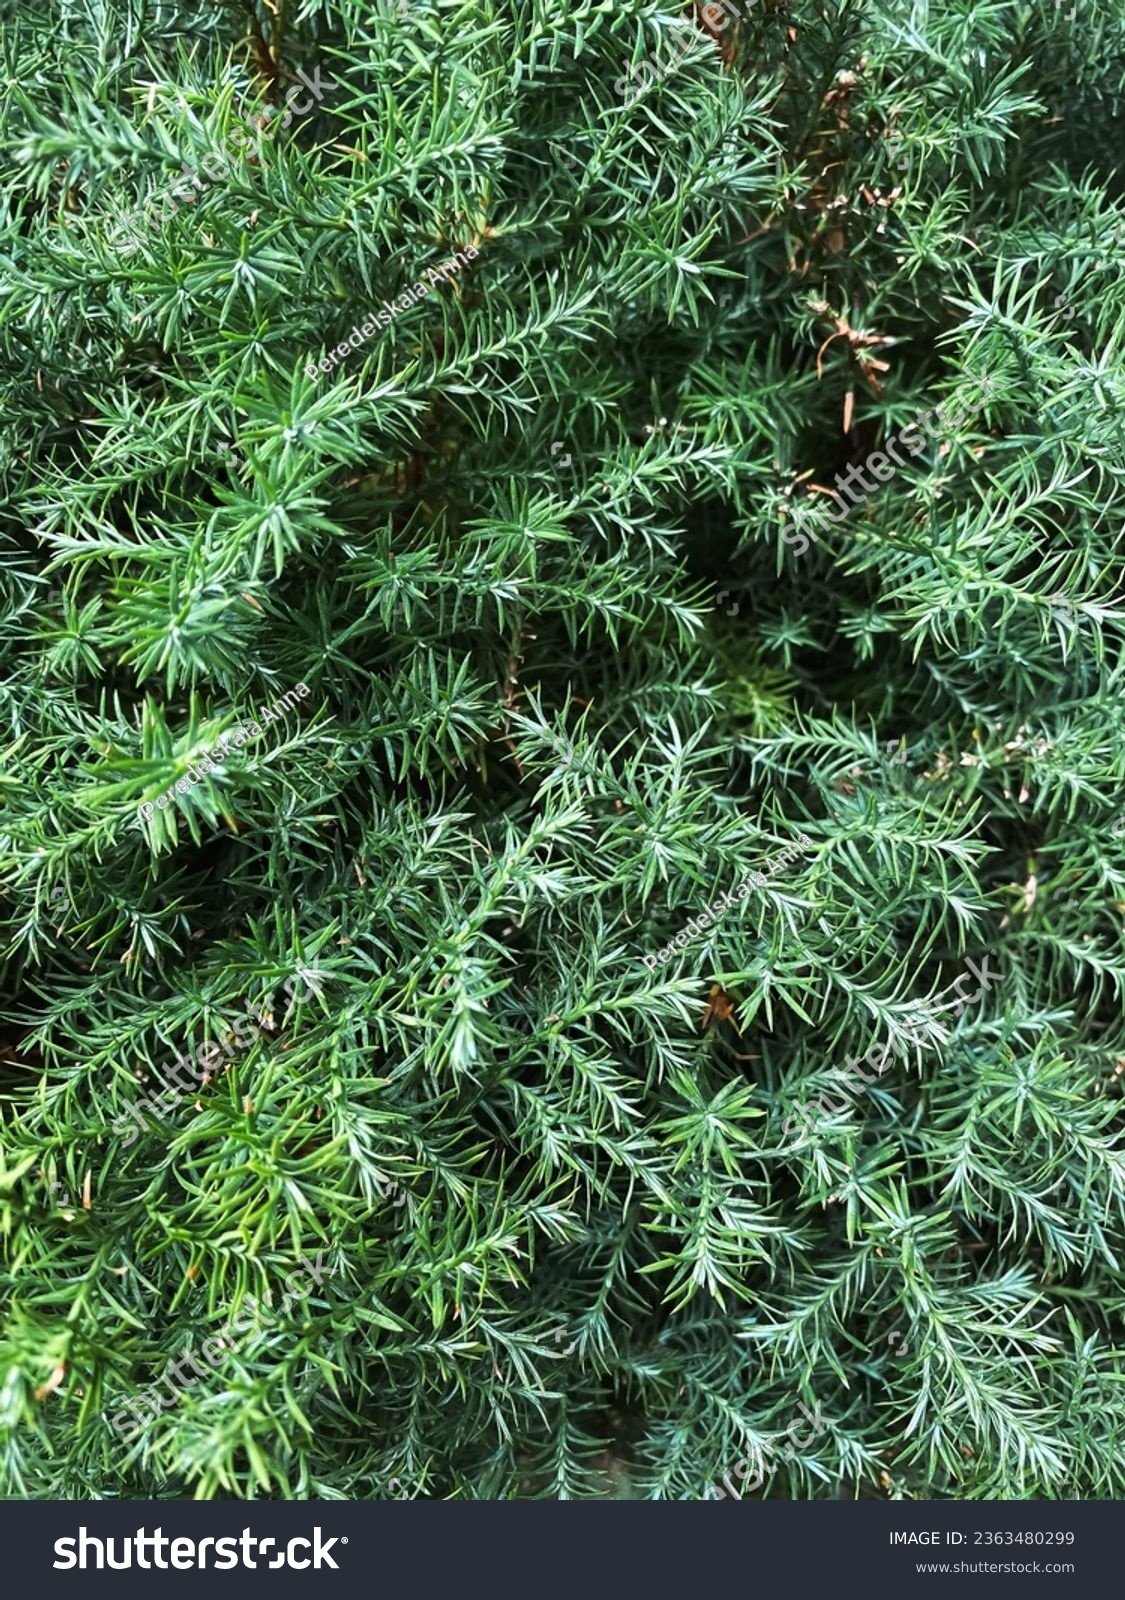 Intricate texture pattern showcasing the distinctive scales of common juniper, presenting a detailed look into the natural design of this evergreen shrub. #2363480299